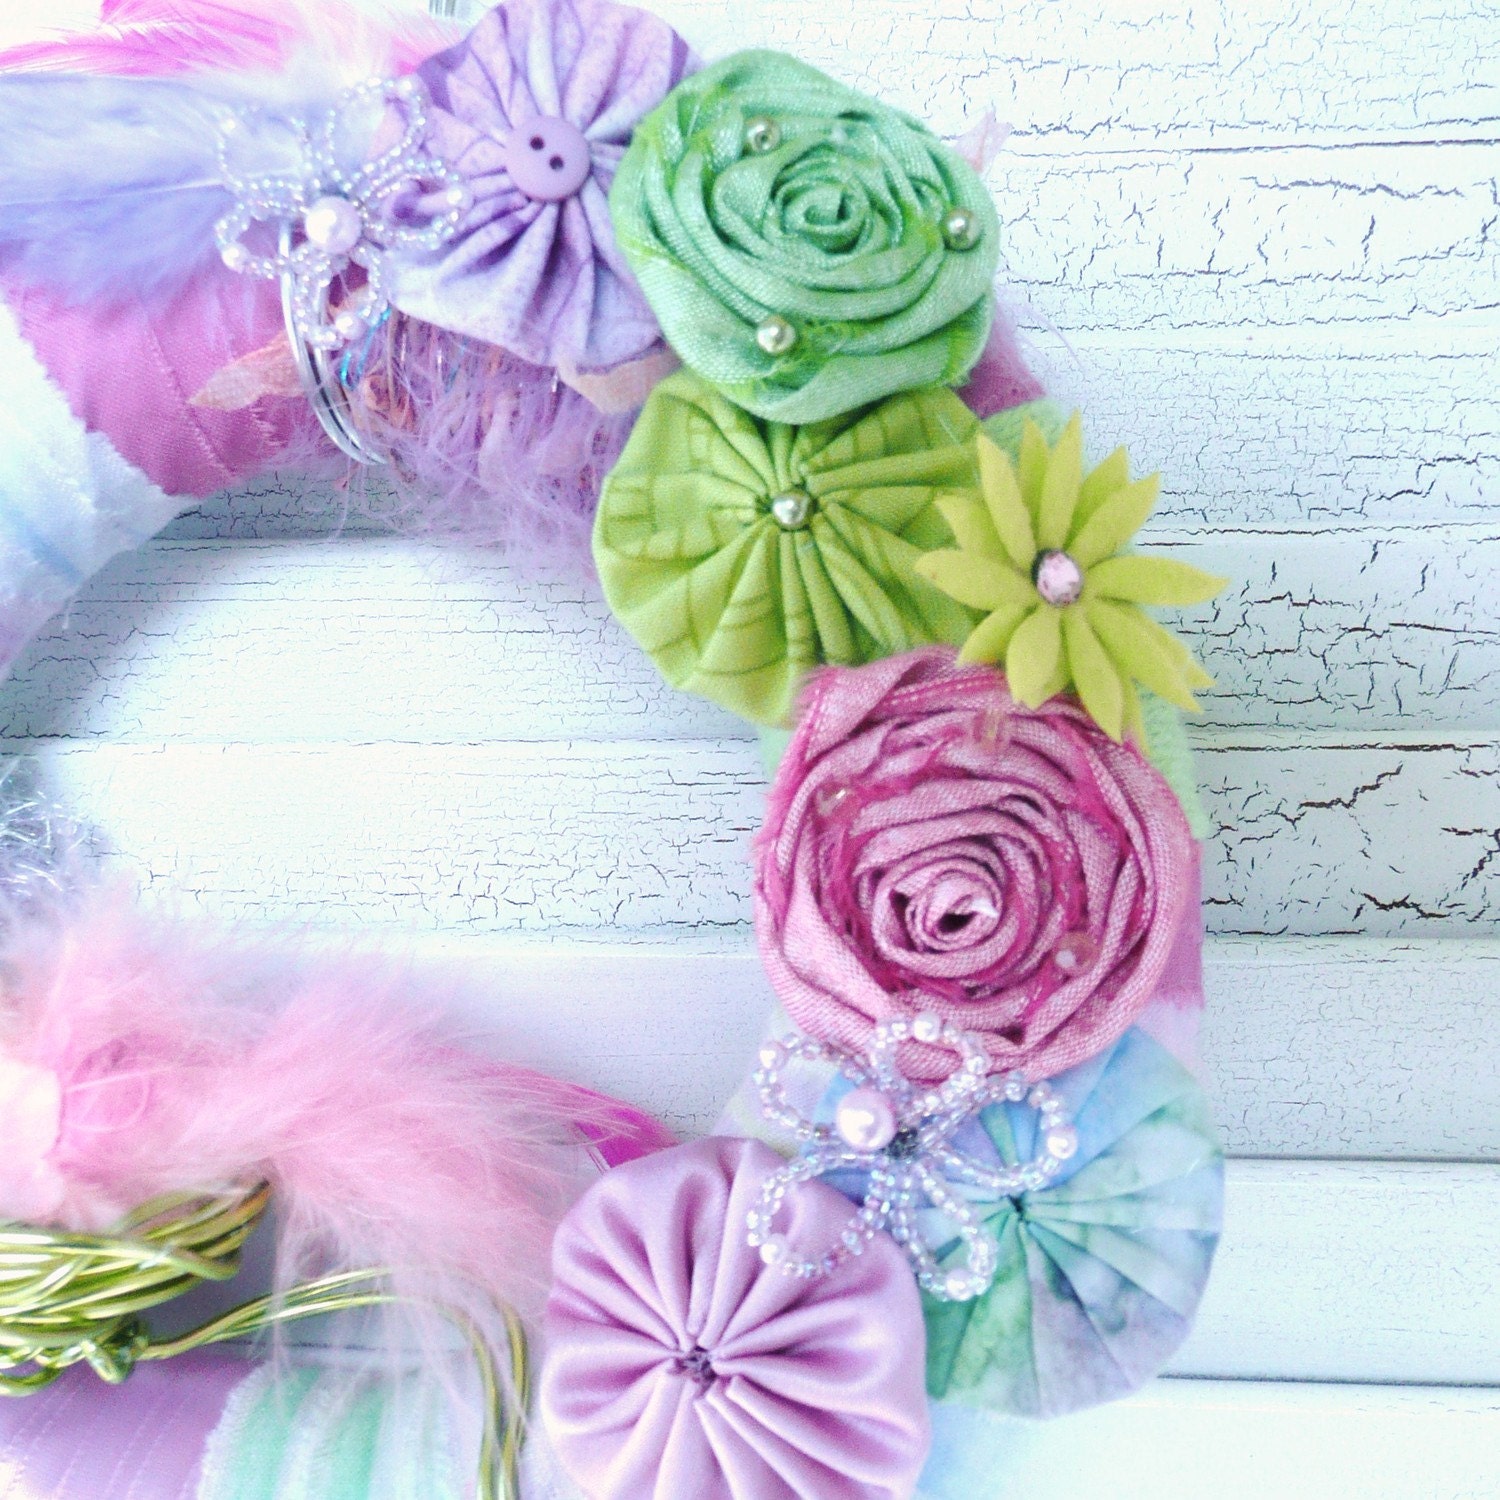 Spring Wreath with birds nest, Pastel fabric and Yarn with flowers